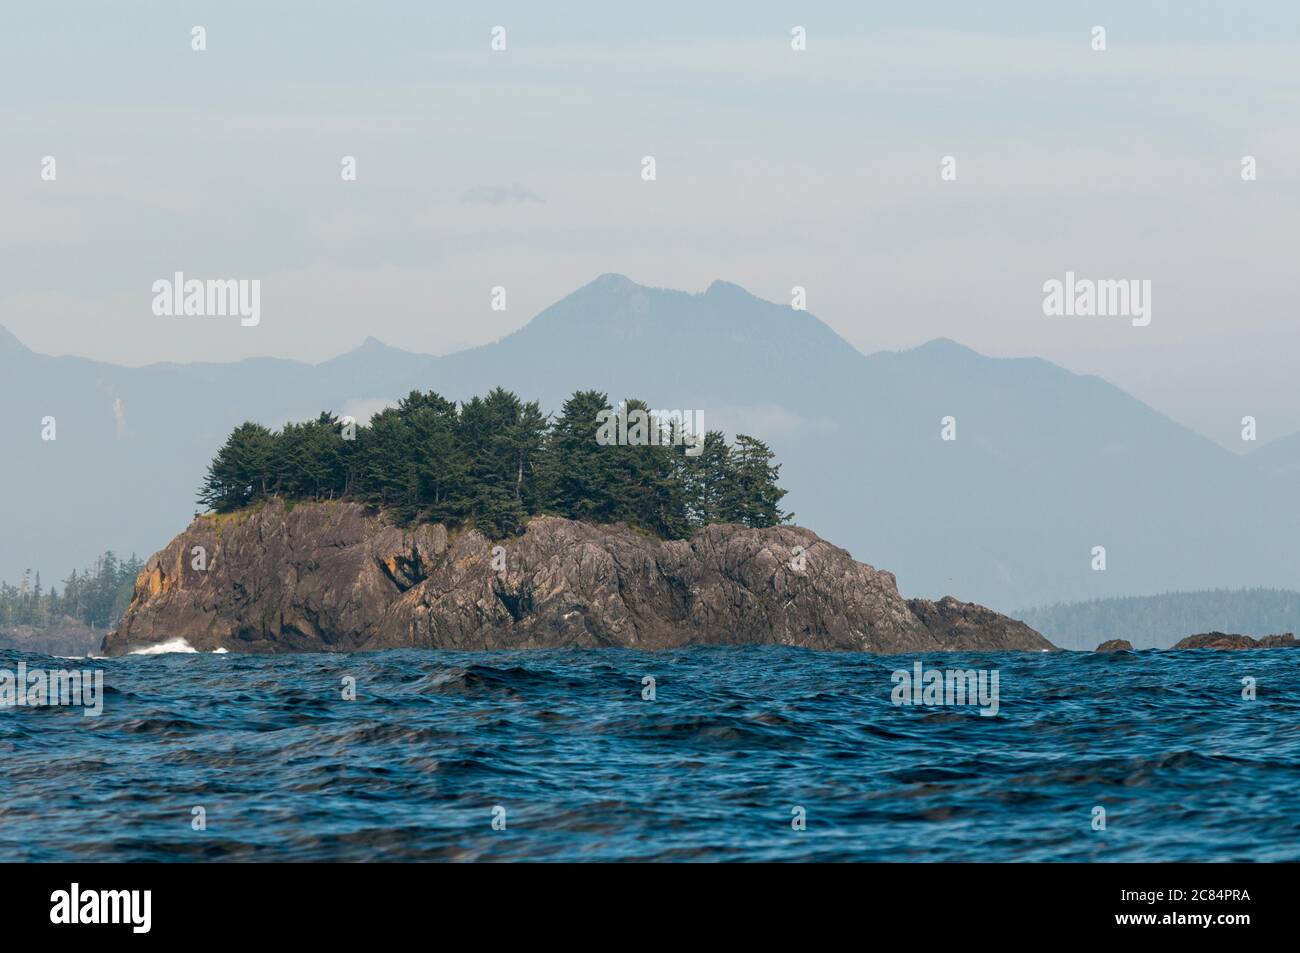 An island in Ucluelet Inlet, Vancouver Island, British Columbia, Canada. Stock Photo